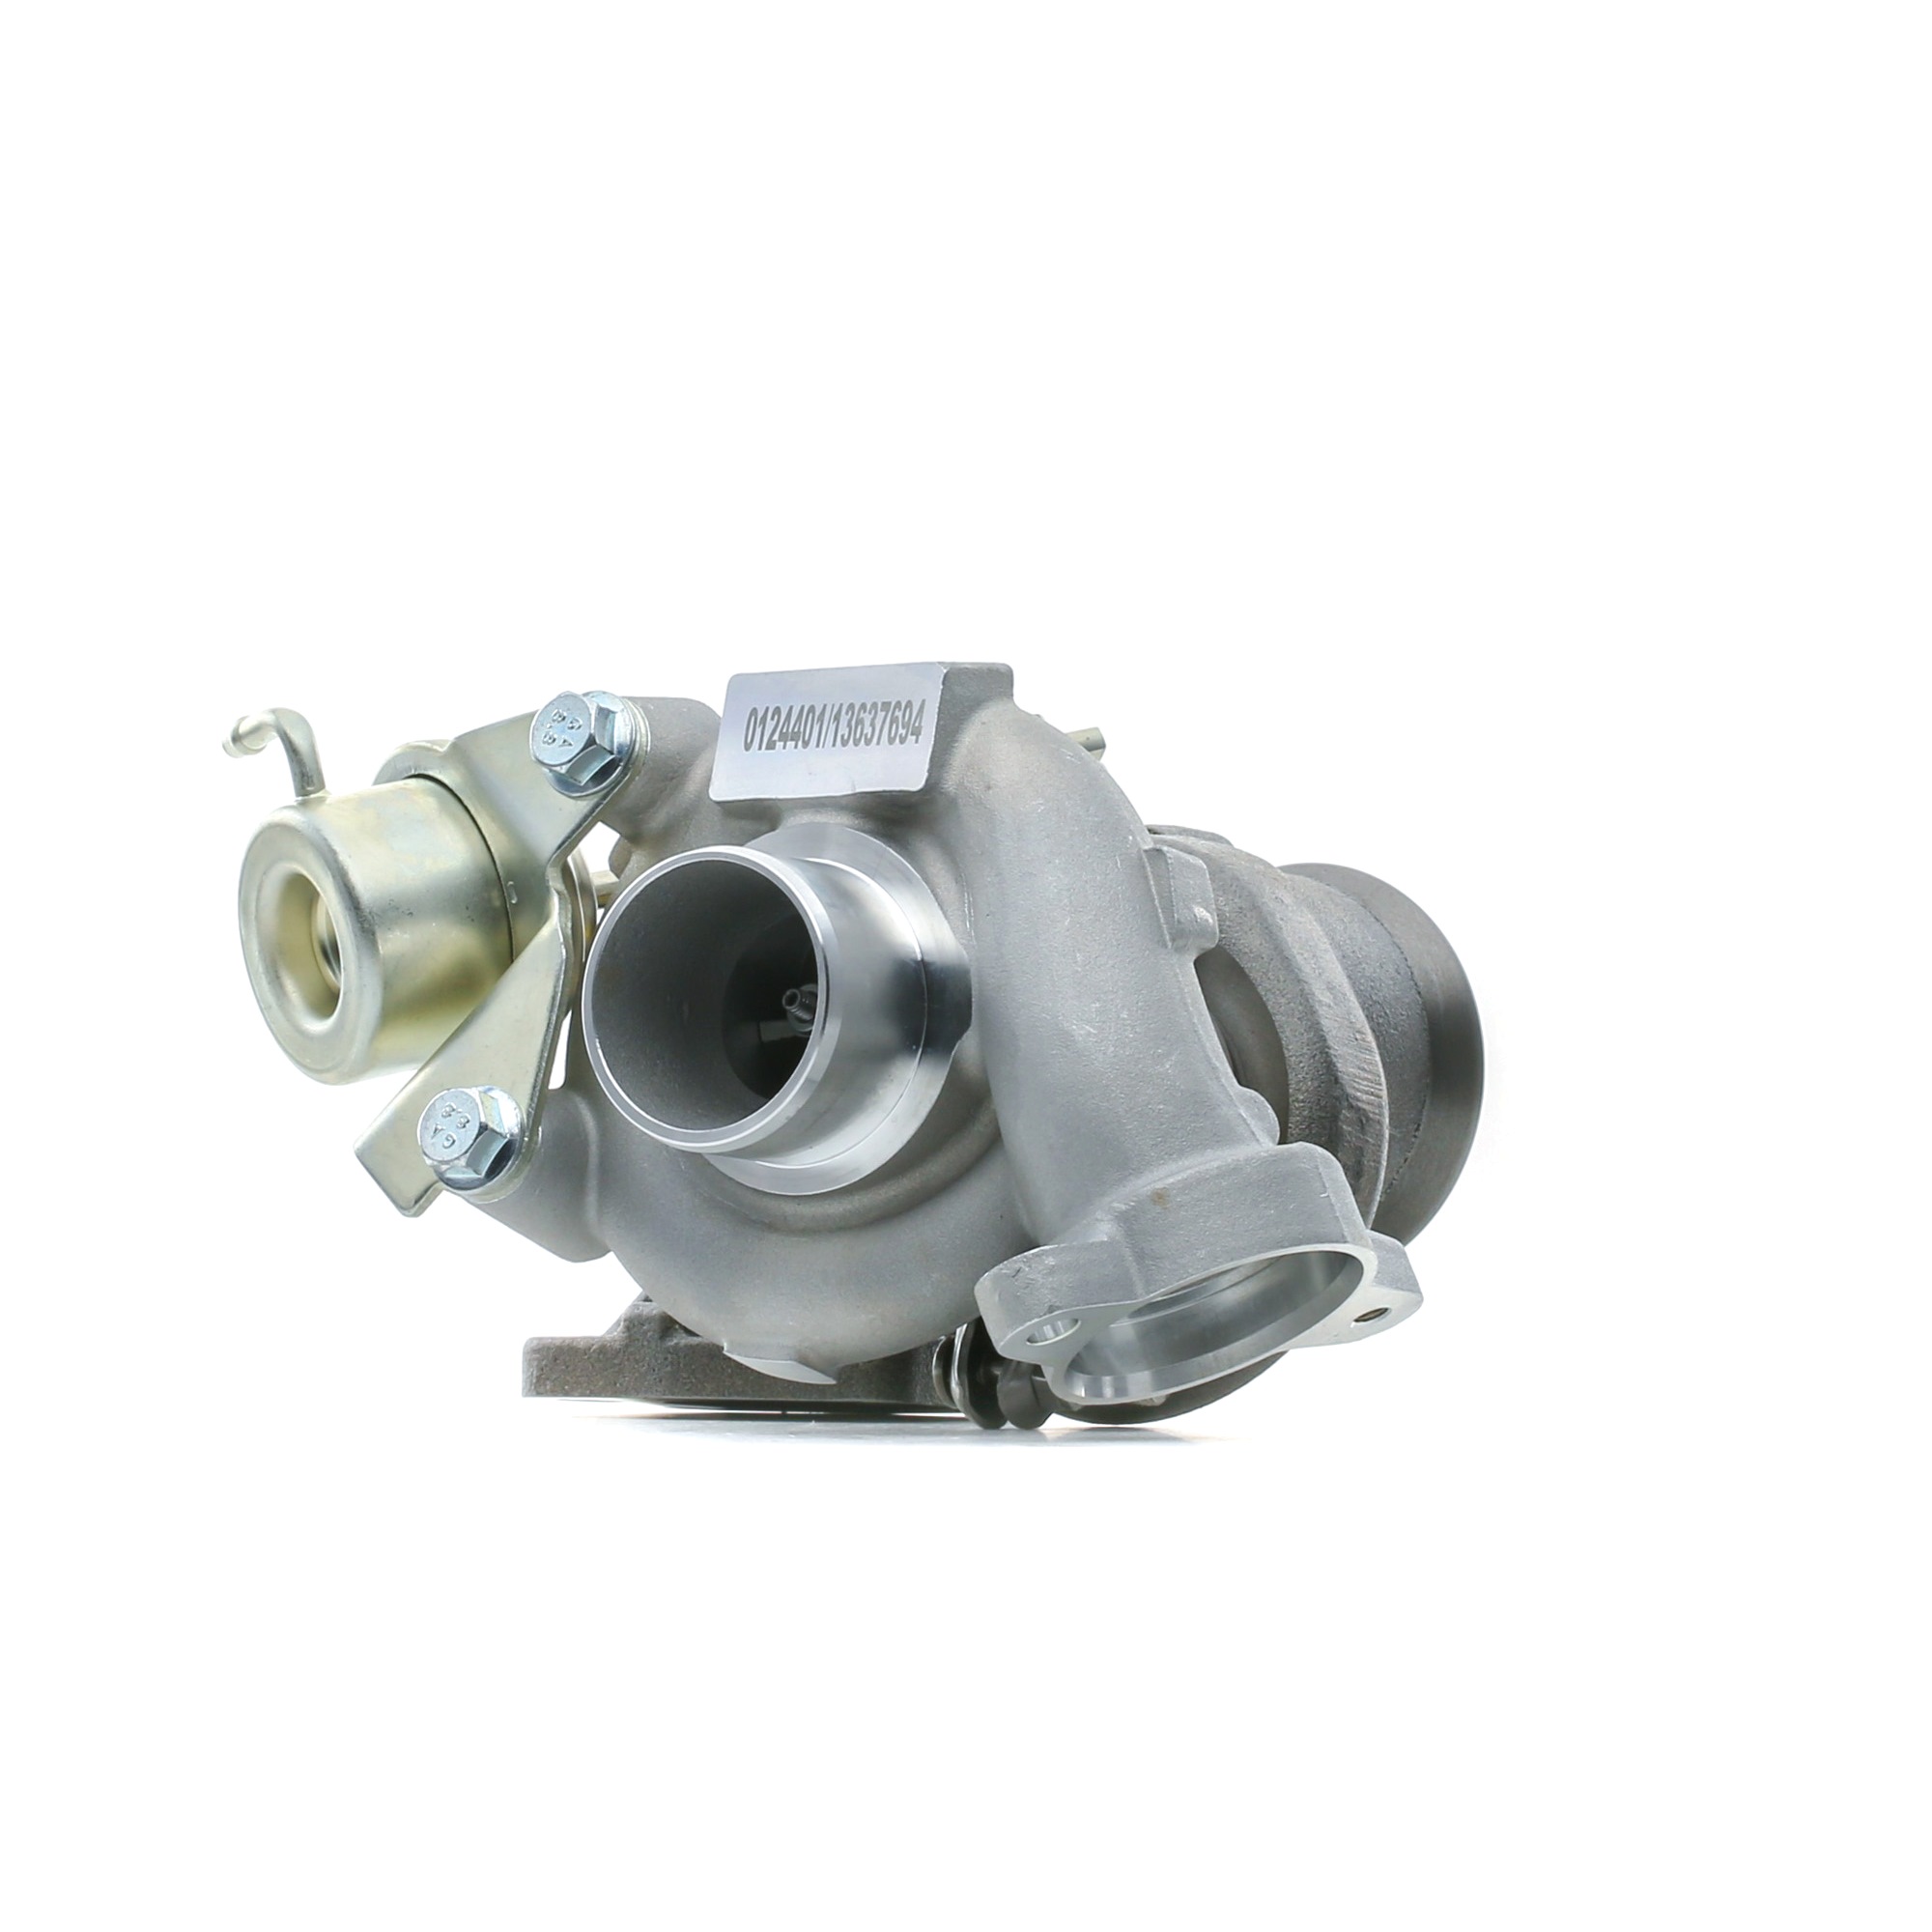 STARK SKCT-1190142 Turbocharger Exhaust Turbocharger, Pneumatic, with attachment material